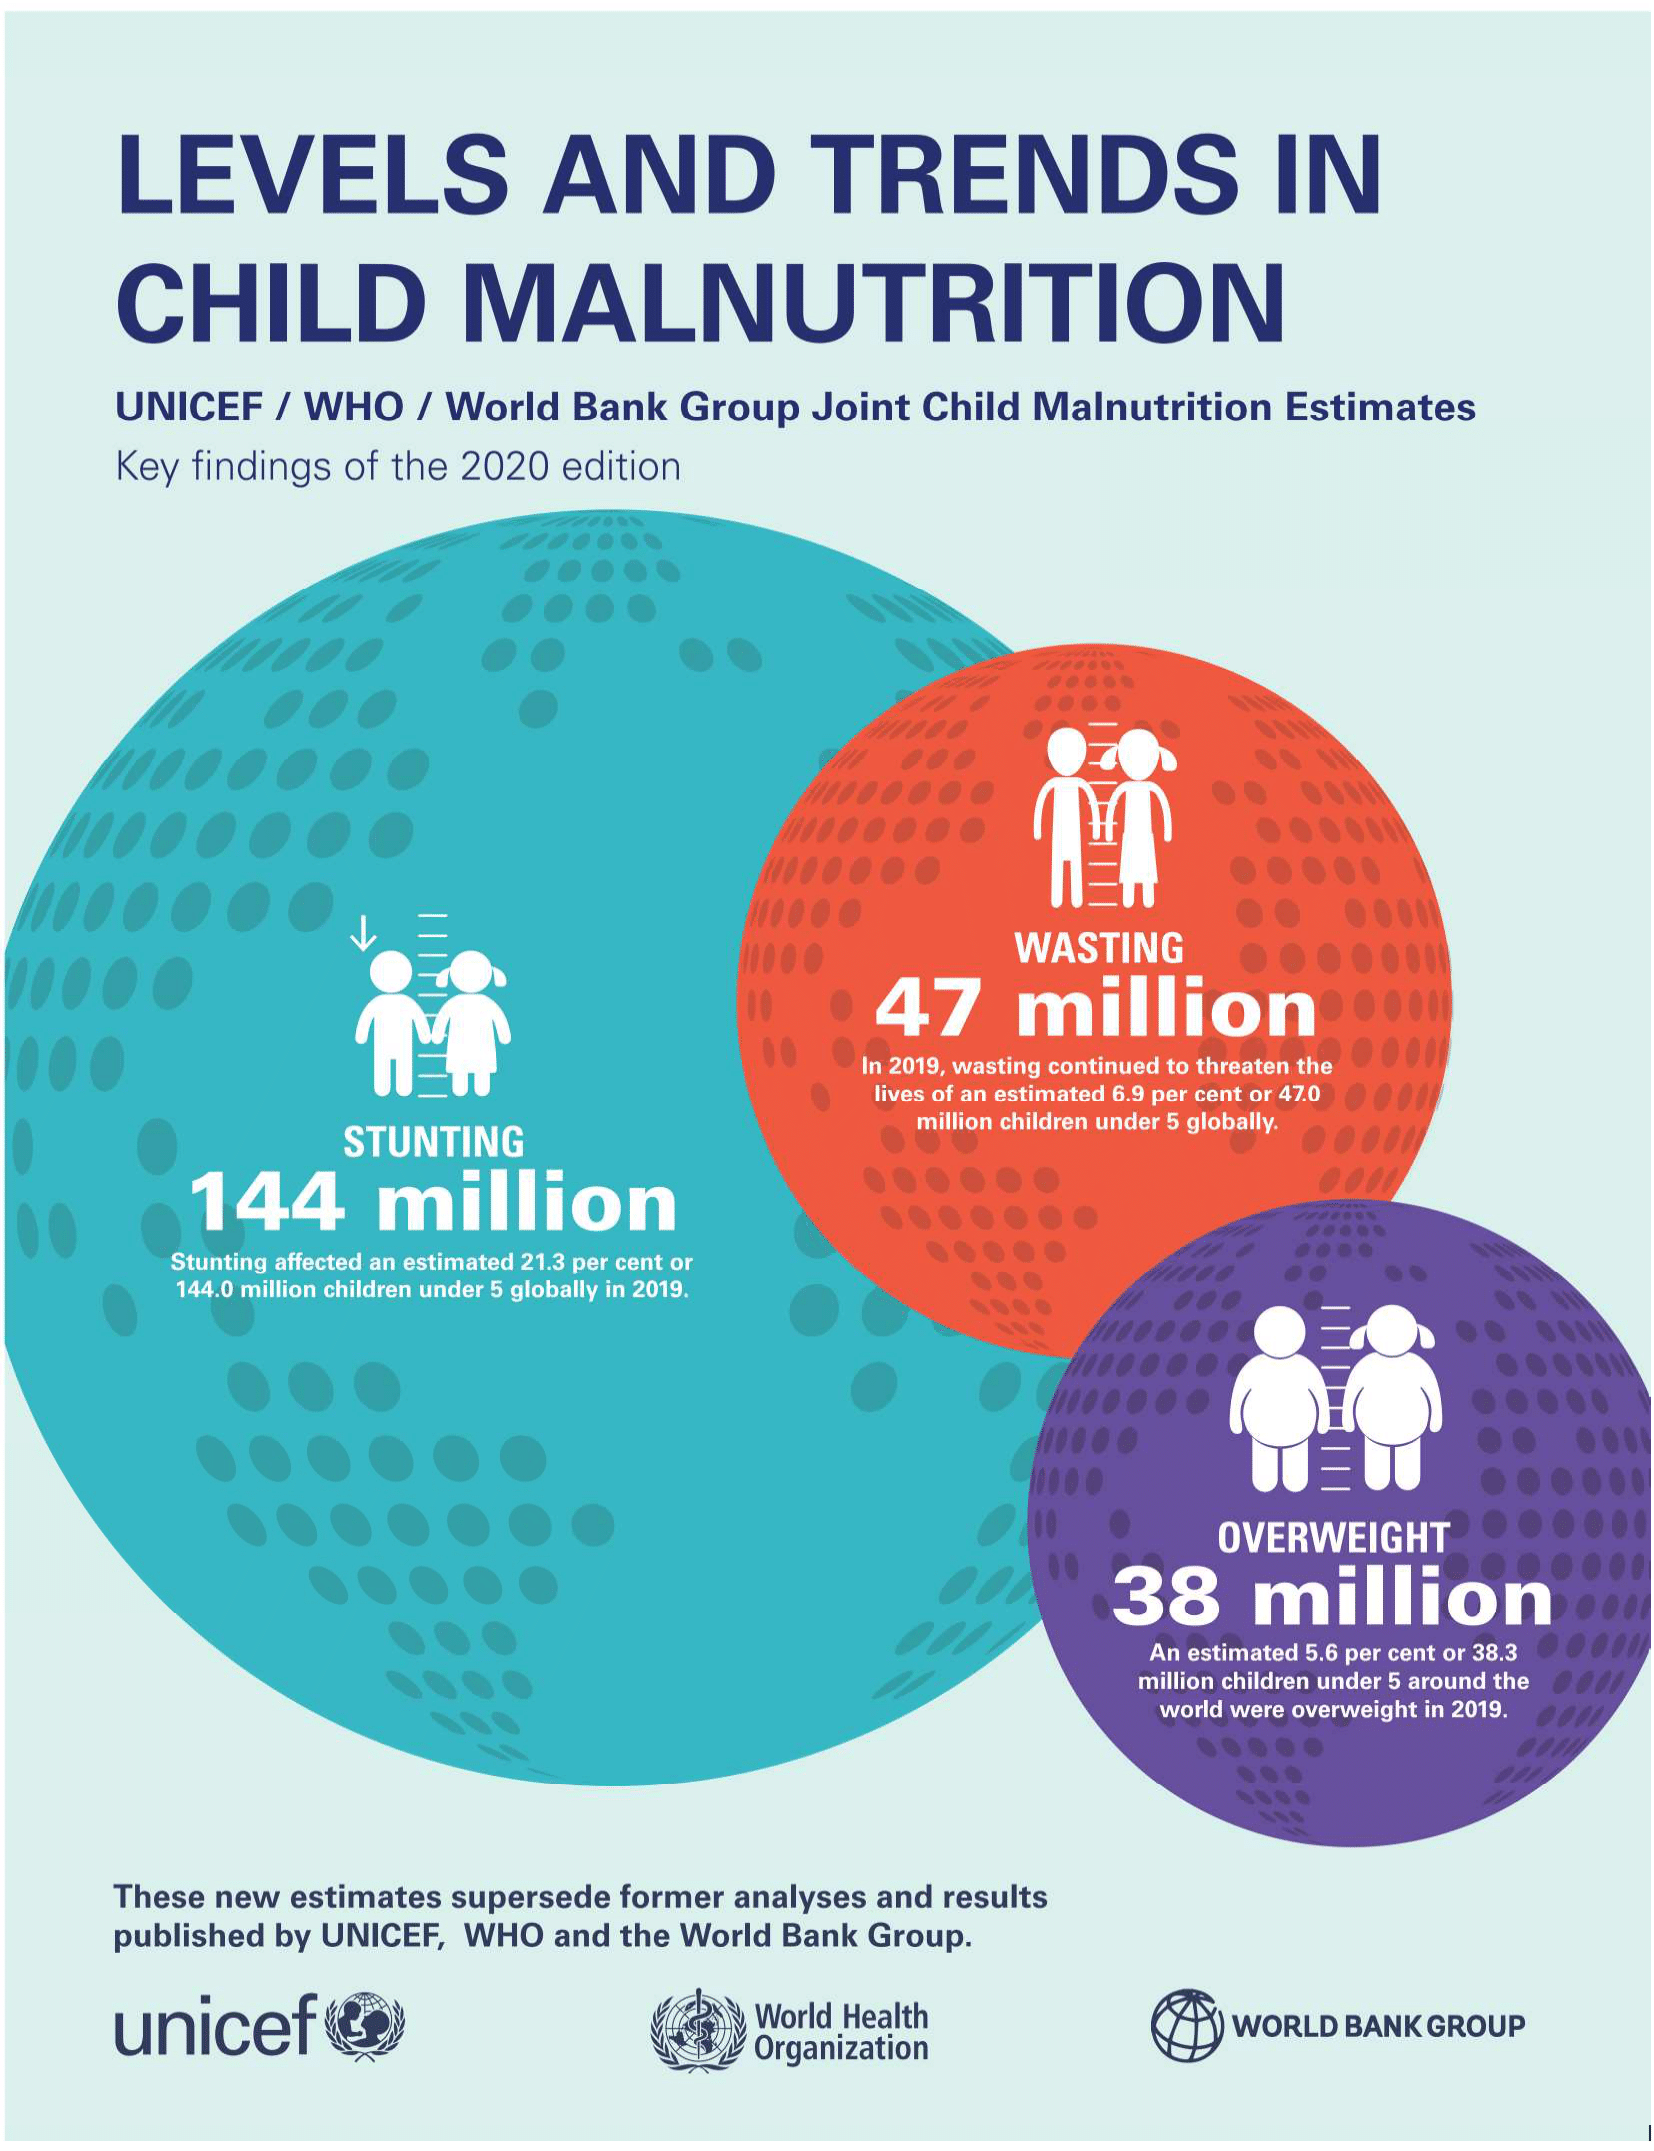 Level and Trend in Child Malnutrition 2020